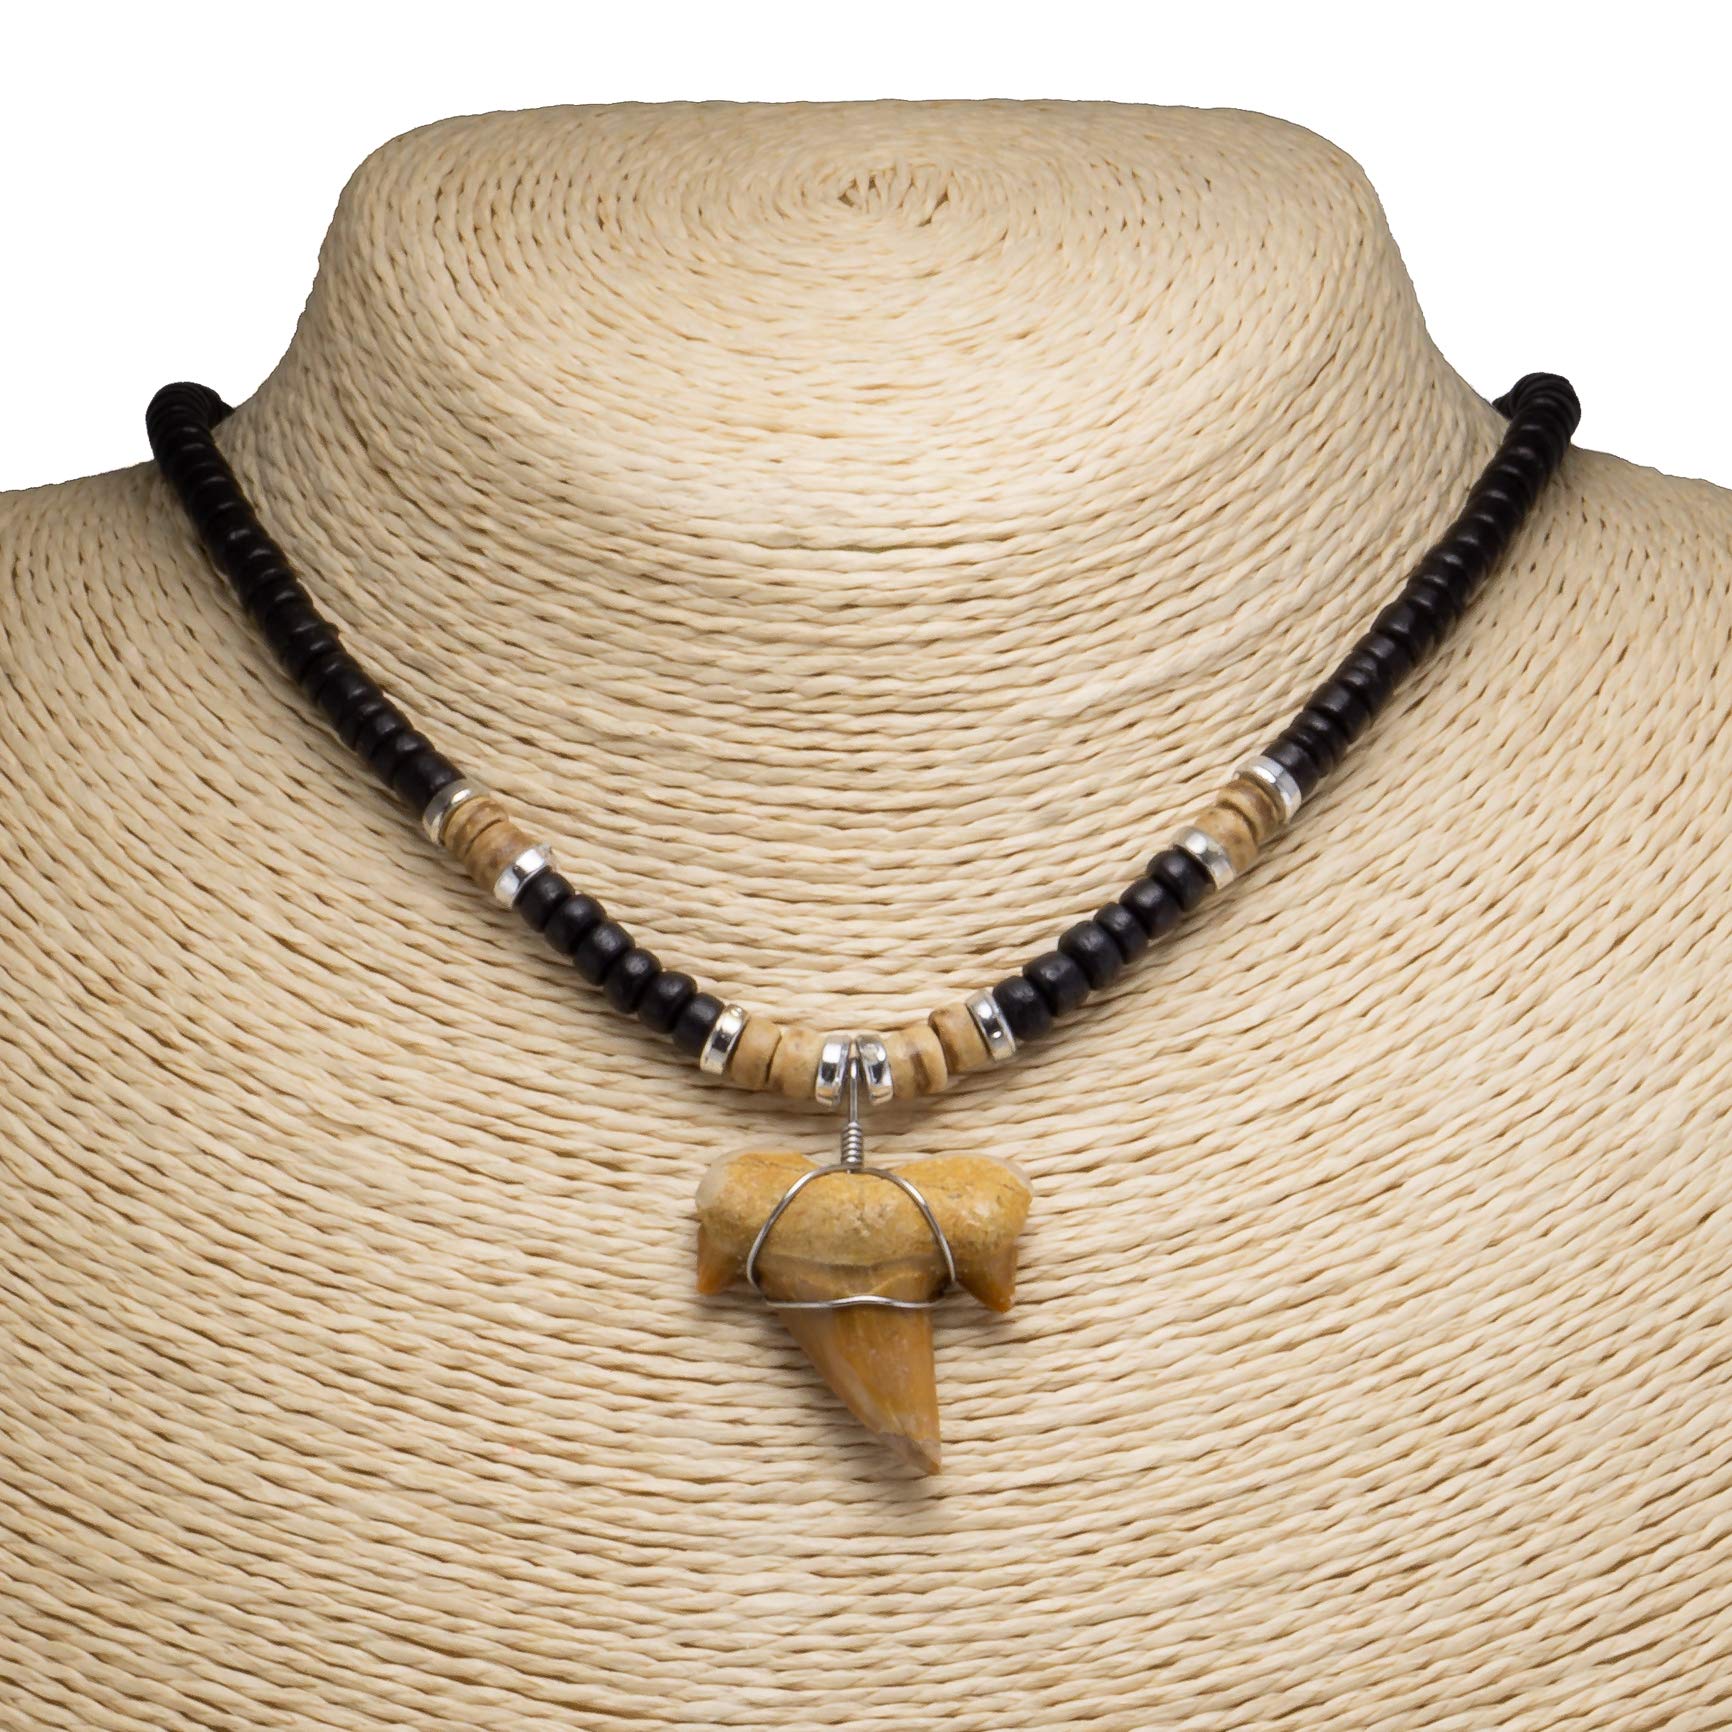 1"+ Shark Tooth Pendant on Black and Tiger Coconut Beads Necklace